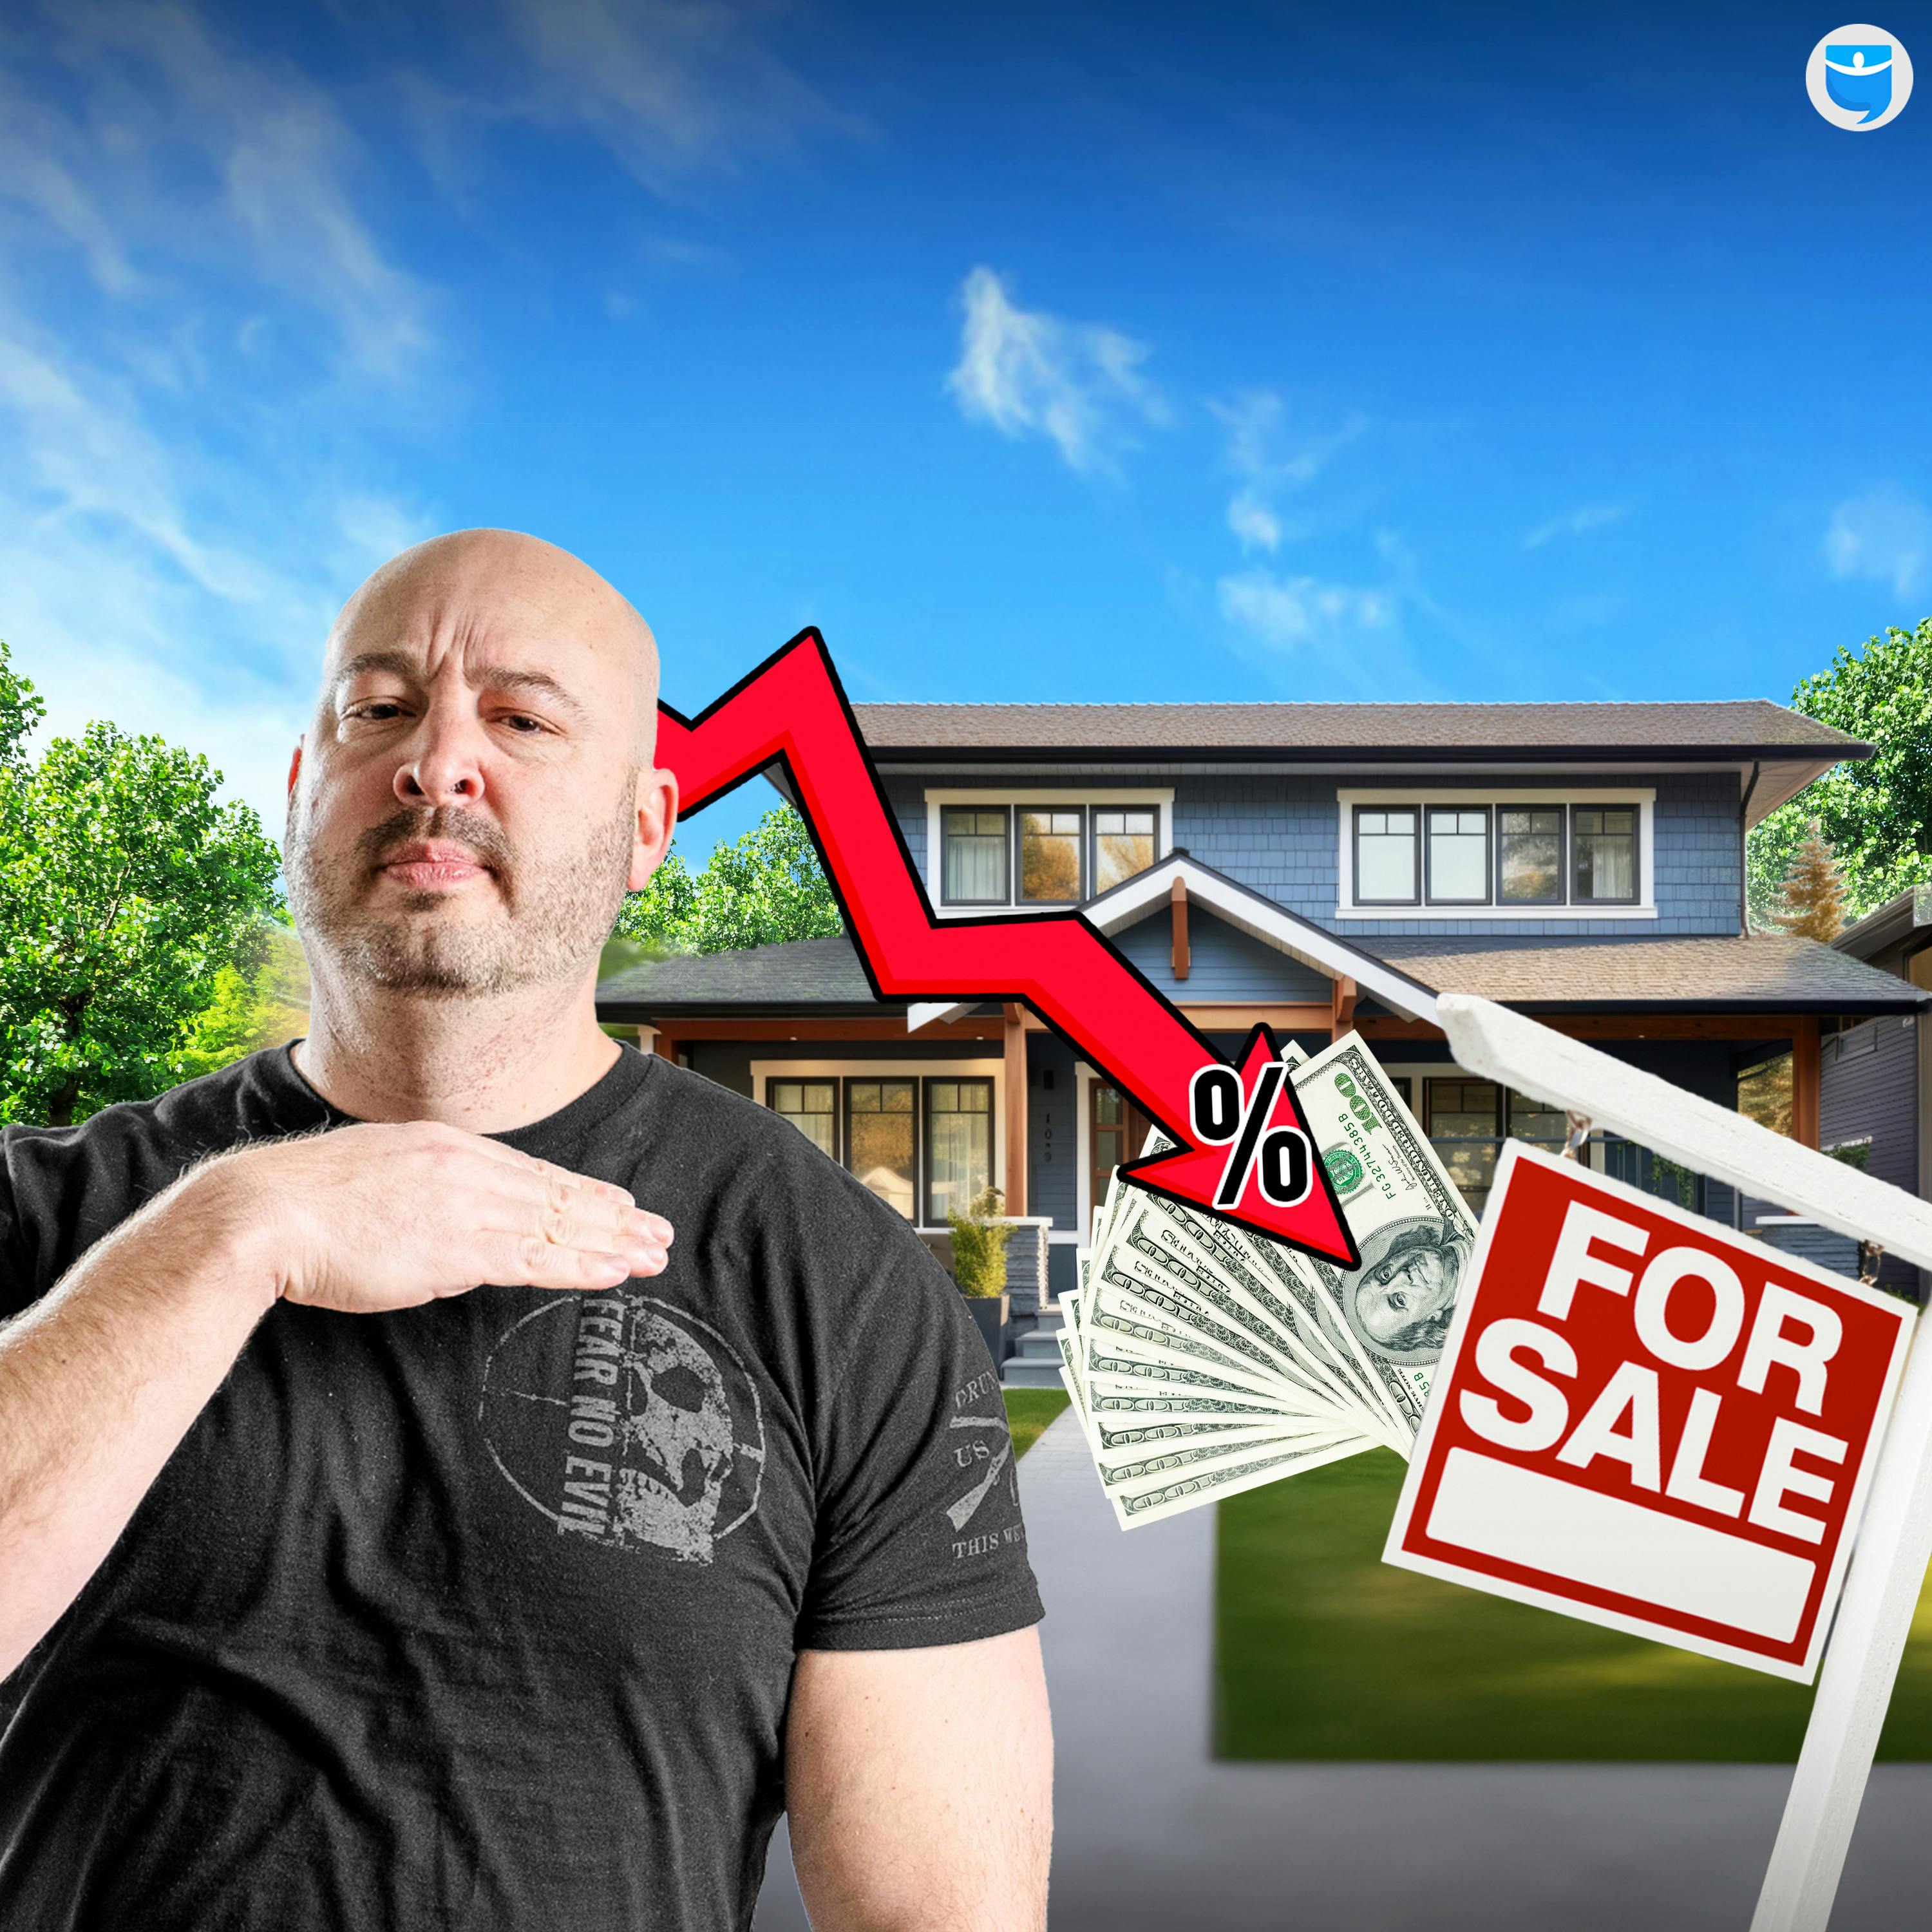 887: Seeing Greene: Your Last Chance Before the House-Buying “Tsunami” Hits?